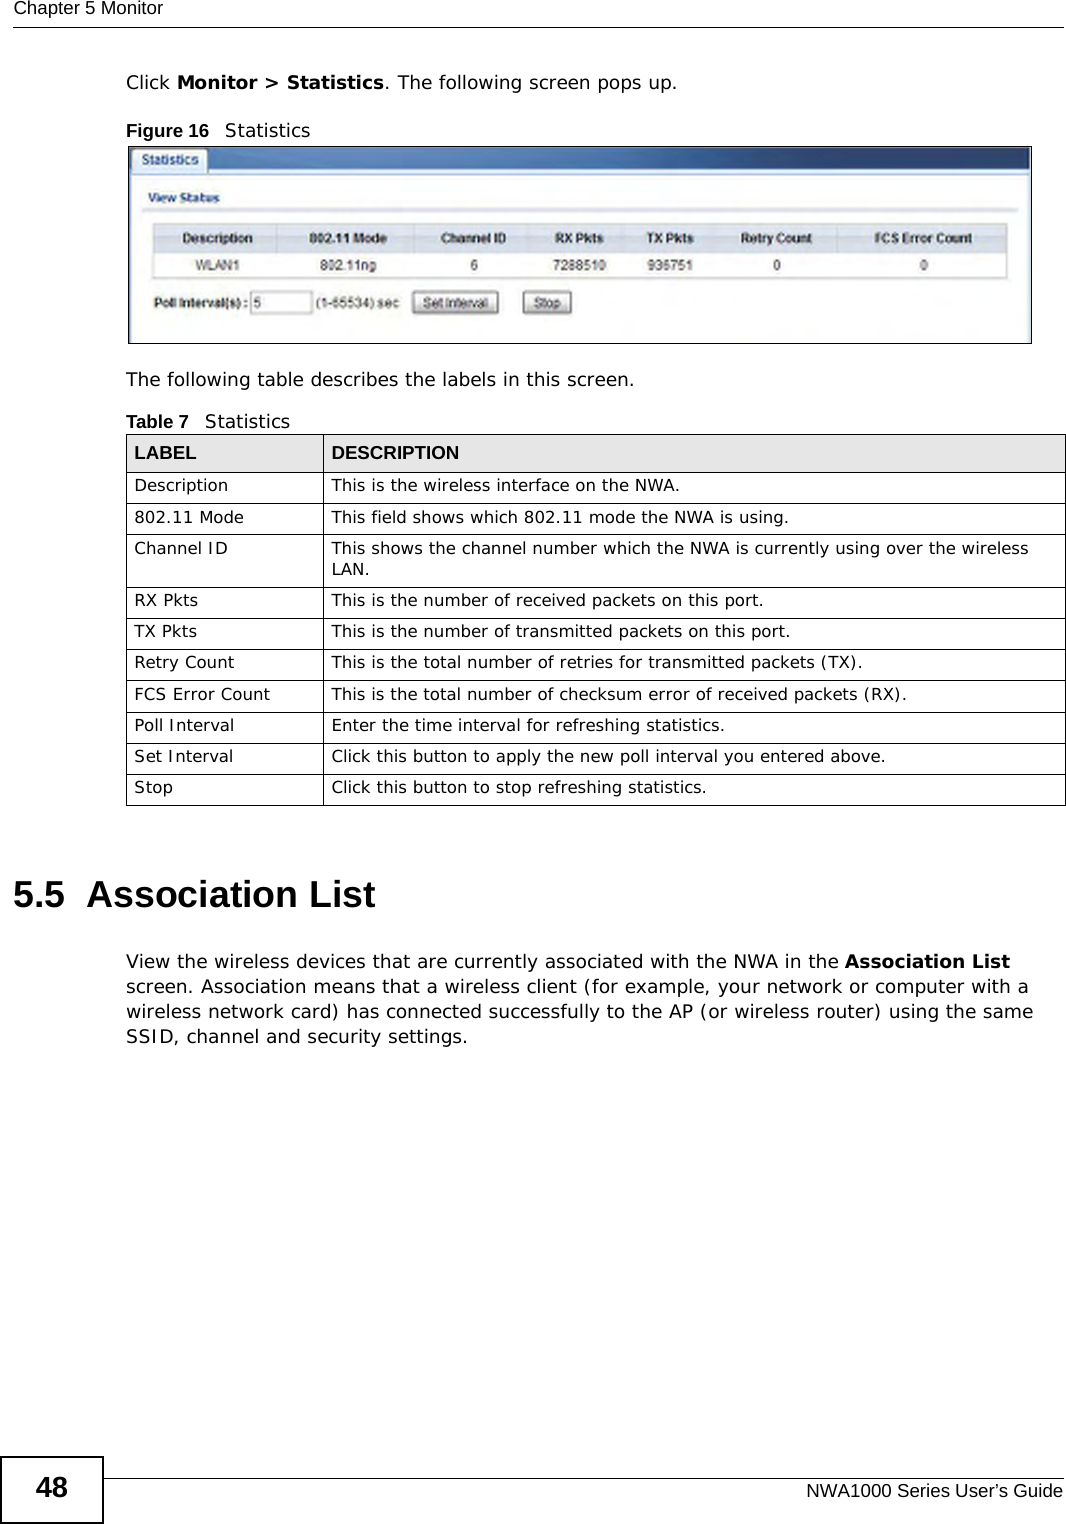 Chapter 5 MonitorNWA1000 Series User’s Guide48Click Monitor &gt; Statistics. The following screen pops up.Figure 16   StatisticsThe following table describes the labels in this screen.5.5  Association ListView the wireless devices that are currently associated with the NWA in the Association List screen. Association means that a wireless client (for example, your network or computer with a wireless network card) has connected successfully to the AP (or wireless router) using the same SSID, channel and security settings.Table 7   StatisticsLABEL DESCRIPTIONDescription This is the wireless interface on the NWA. 802.11 Mode This field shows which 802.11 mode the NWA is using.Channel ID This shows the channel number which the NWA is currently using over the wireless LAN. RX Pkts This is the number of received packets on this port.TX Pkts This is the number of transmitted packets on this port.Retry Count This is the total number of retries for transmitted packets (TX).FCS Error Count This is the total number of checksum error of received packets (RX).Poll Interval Enter the time interval for refreshing statistics.Set Interval Click this button to apply the new poll interval you entered above.Stop Click this button to stop refreshing statistics.